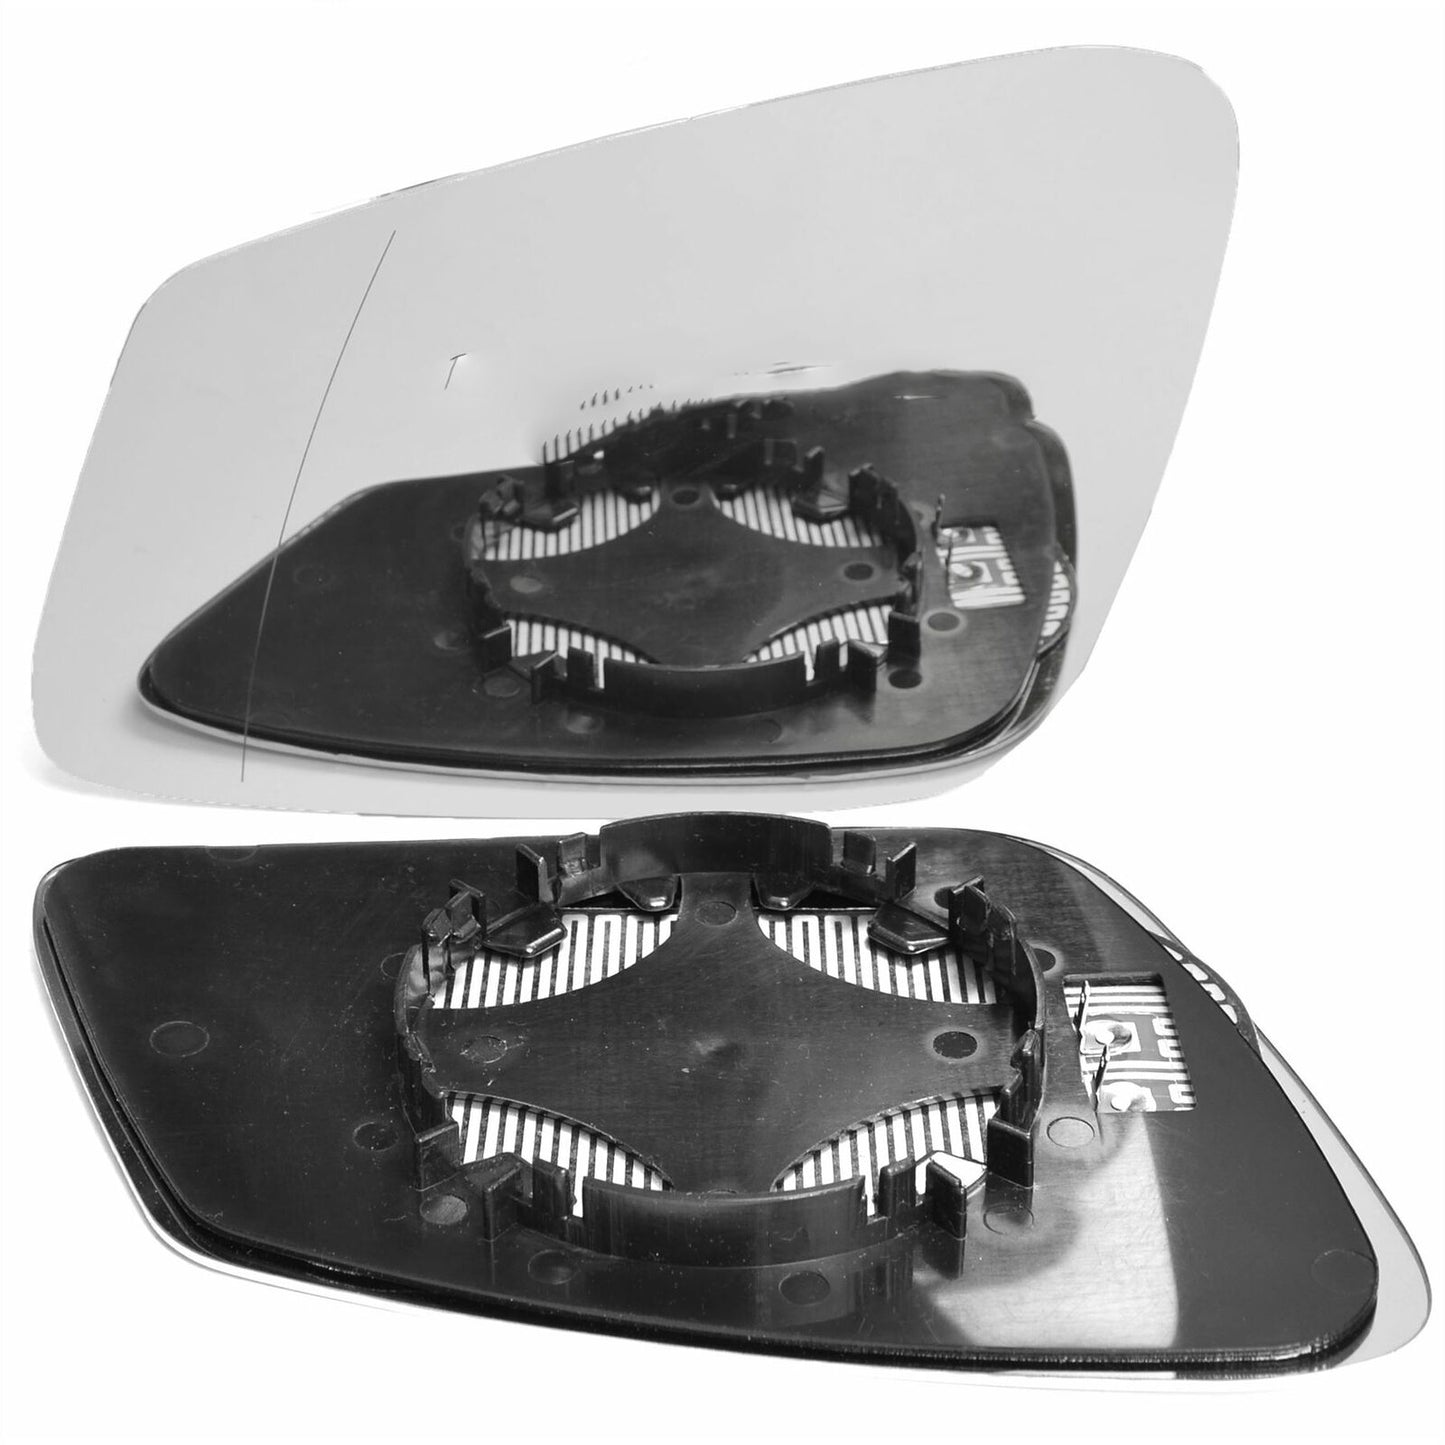 Left passenger side mirror glass for BMW 7 Series 2009-2015 wide angle heated